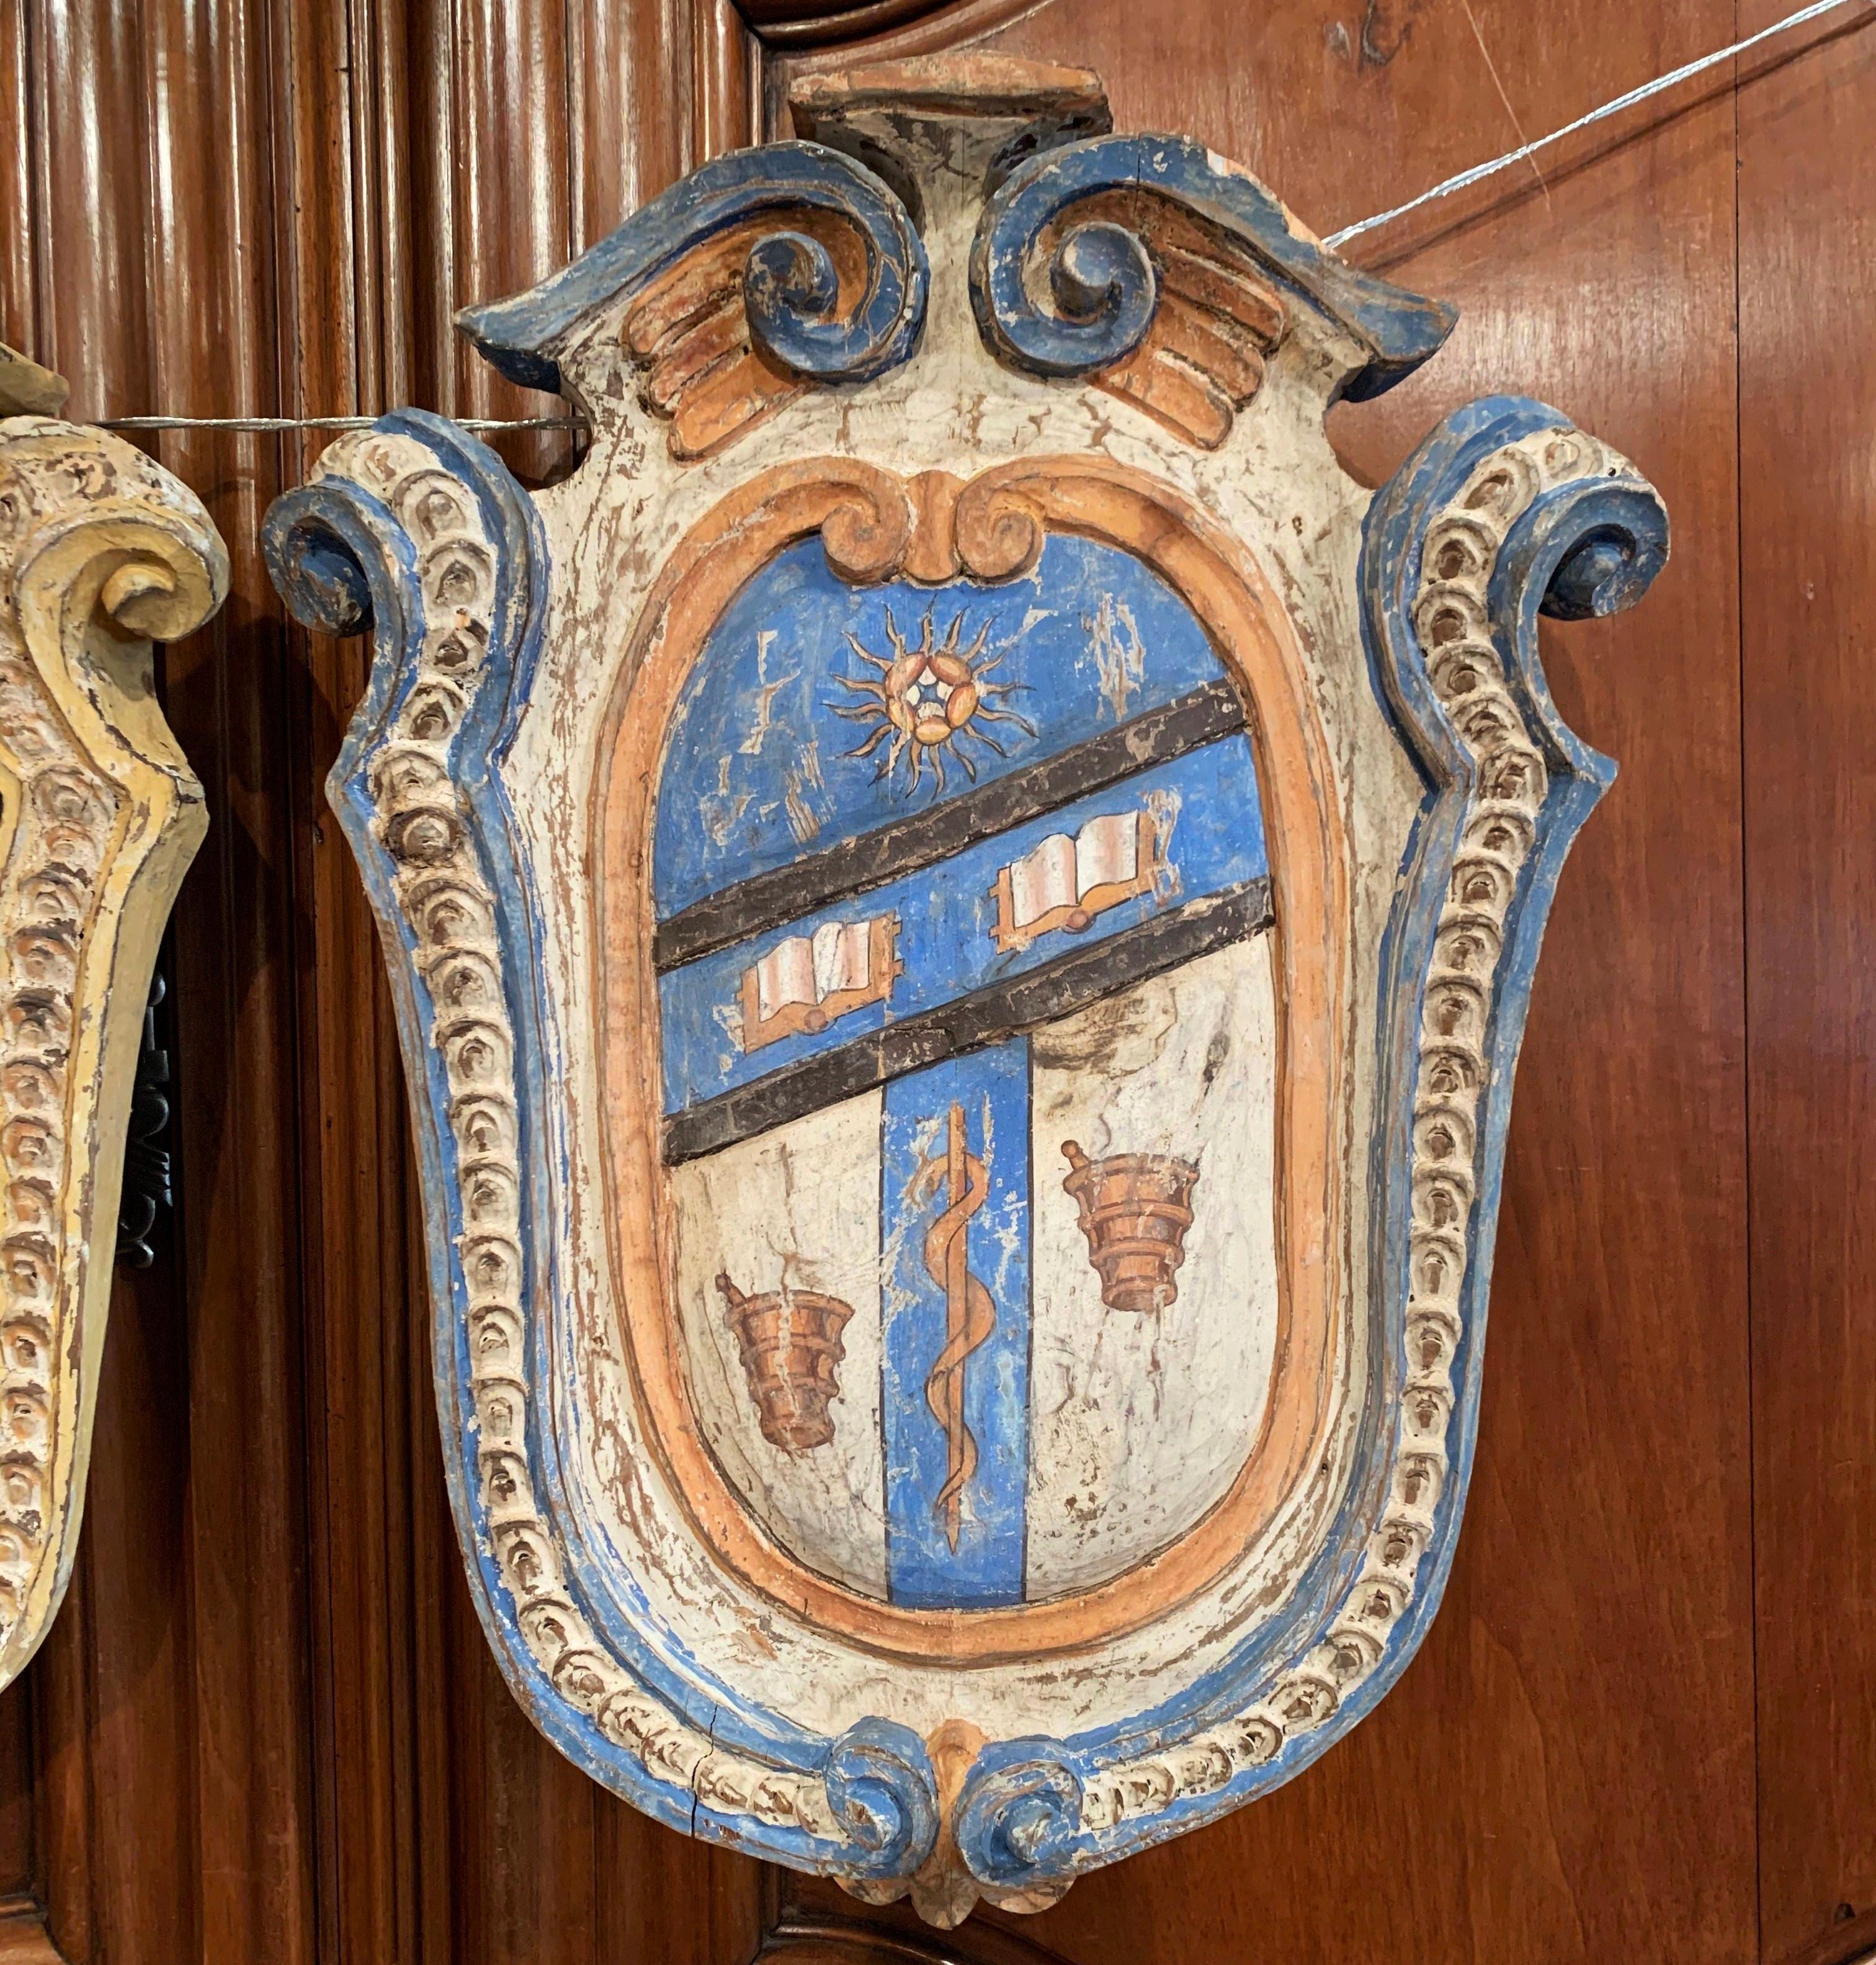 Embellish your study or library with this colorful pair of antique shields. Hand carved in France, circa 1920, each traditional crest features a central coat of arms decorated with hand painted family emblems including lion, book, mortar and